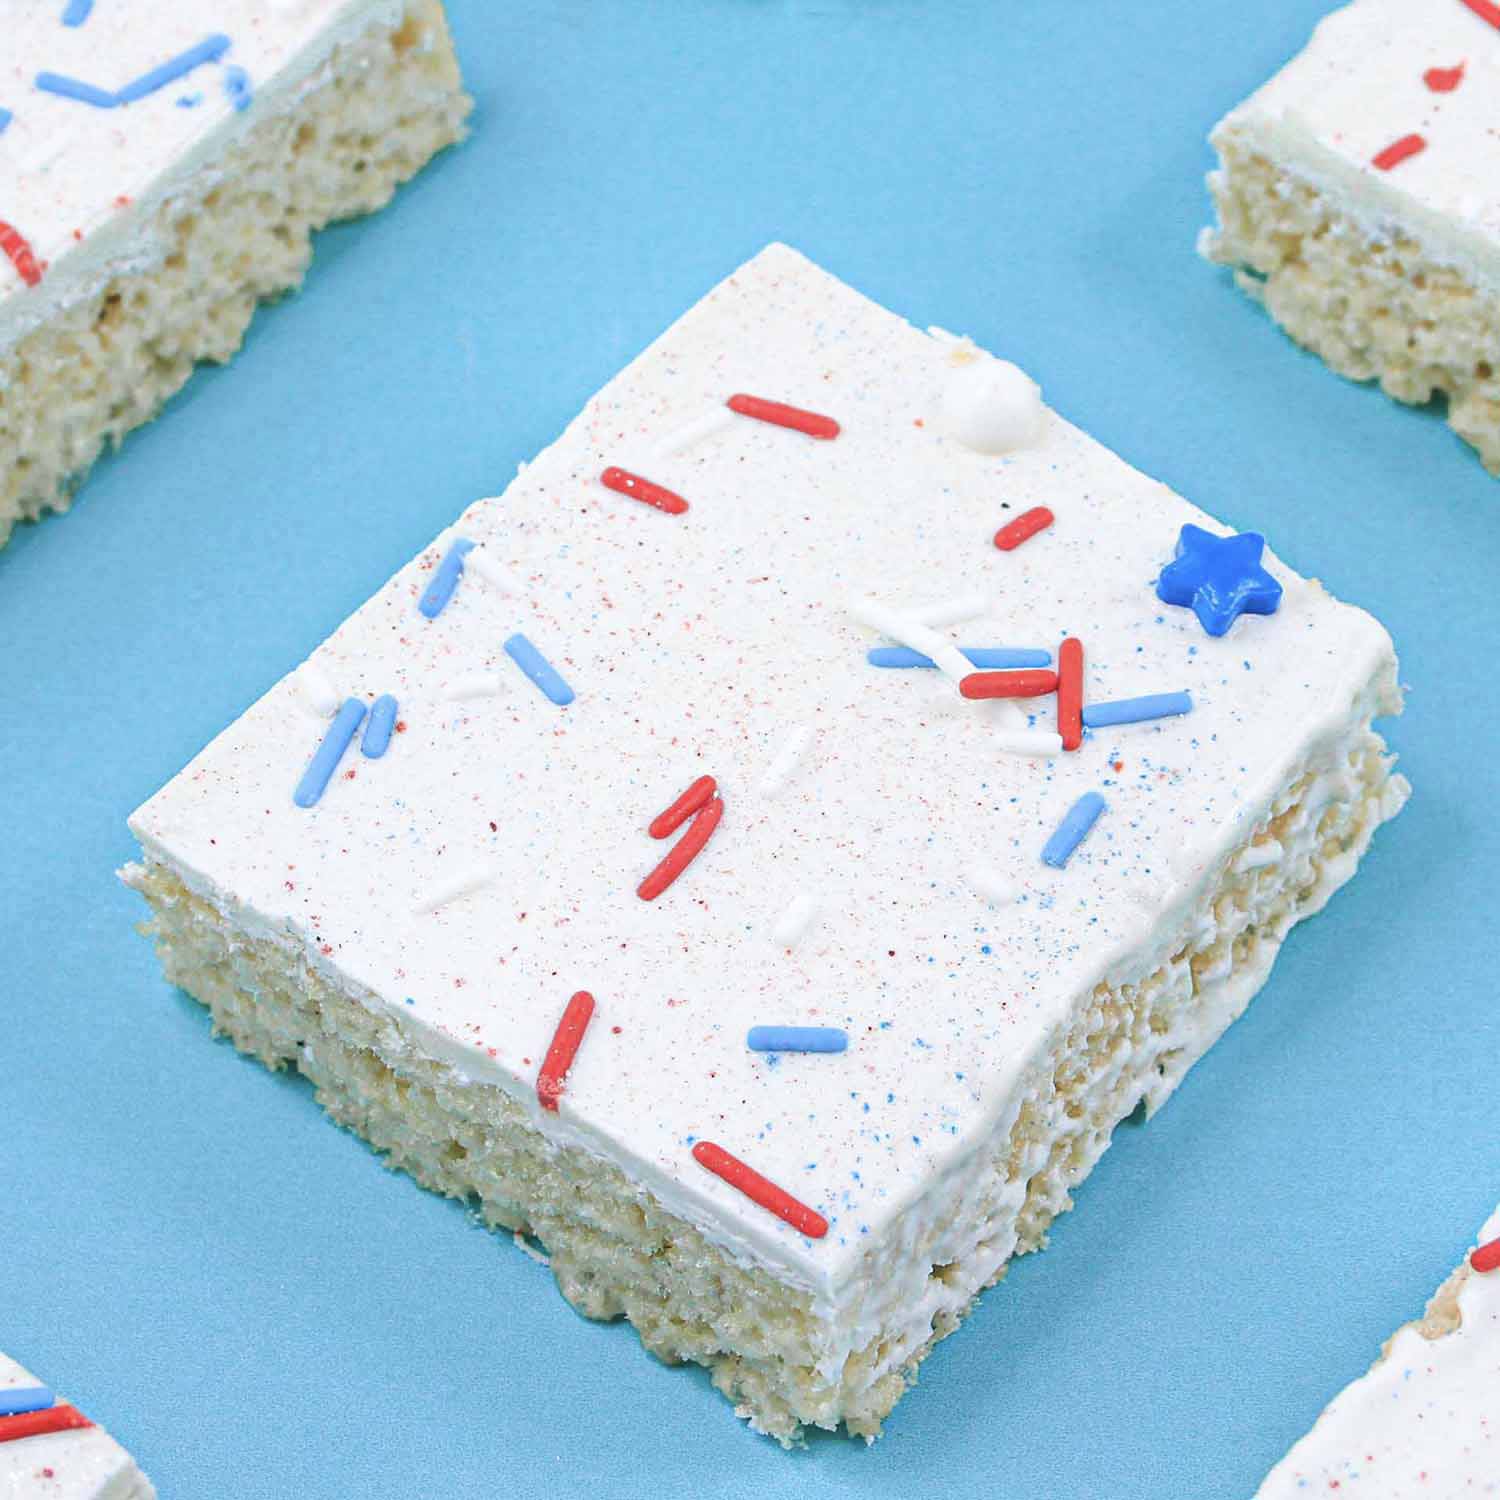 Single cut chocolate coated rice krispie treat topped with red white and blue sprinkles and jewel and diamond dusts.